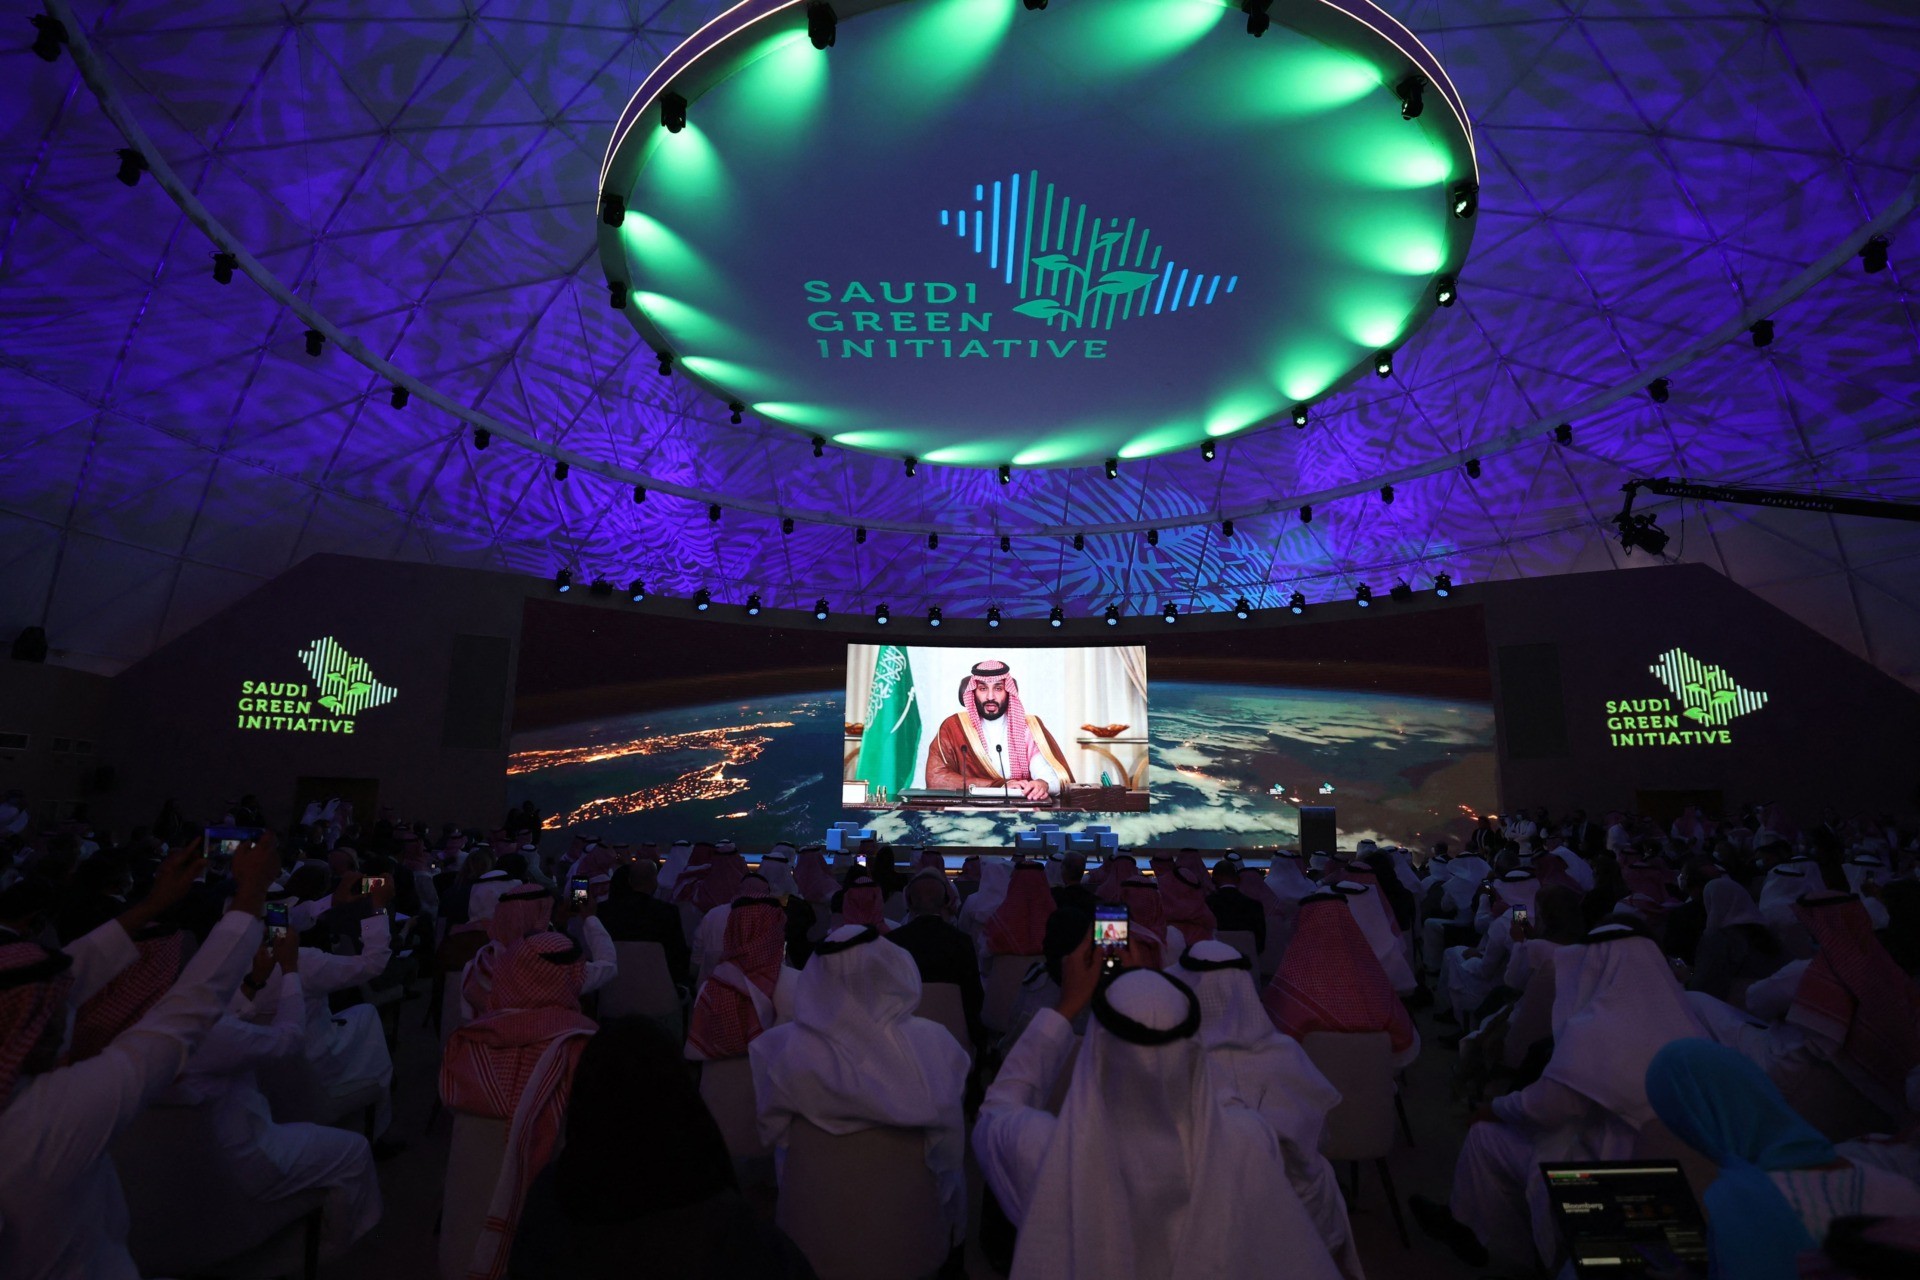 Saudi Crown Prince Mohammed bin Salman delivers a speech during the opening ceremony of the Saudi Green Initiative forum on October 23, 2021, in the Saudi capital Riyadh. (Photo by Fayez Nureldine / AFP) (Photo by FAYEZ NURELDINE/AFP via Getty Images)